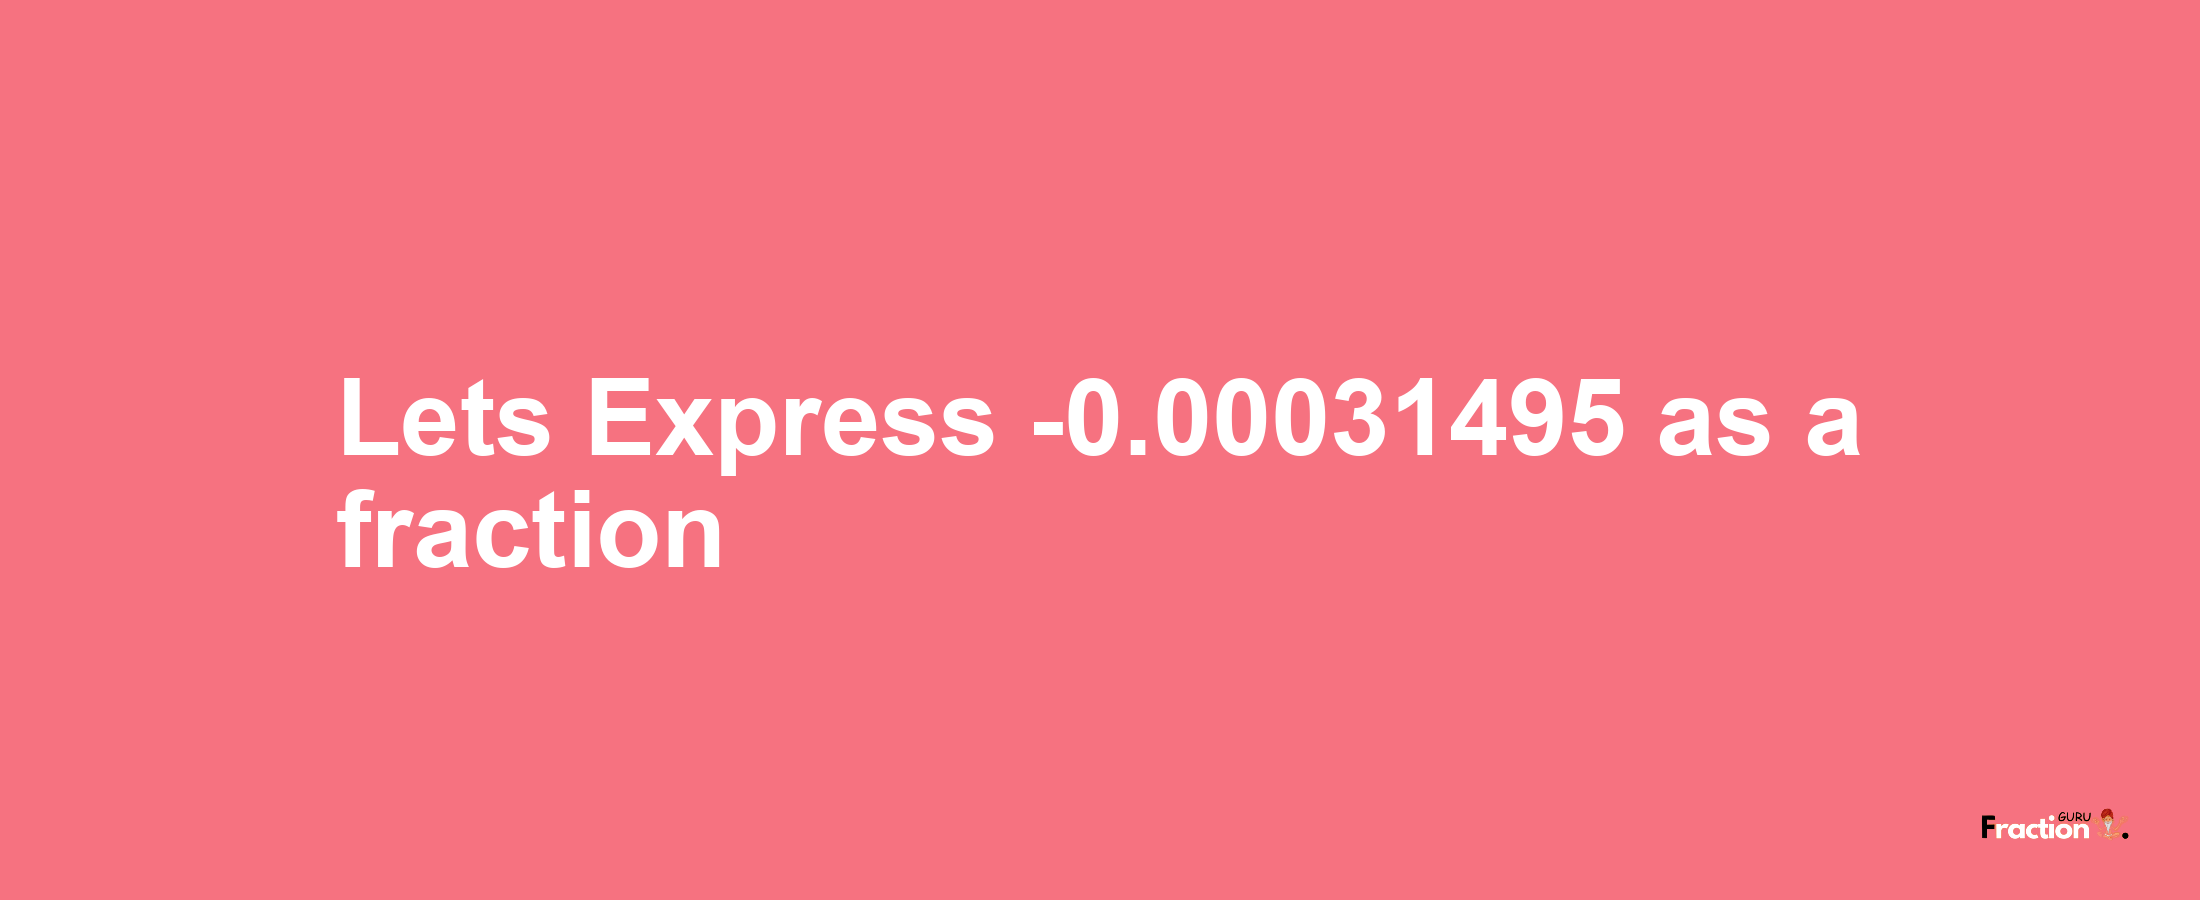 Lets Express -0.00031495 as afraction